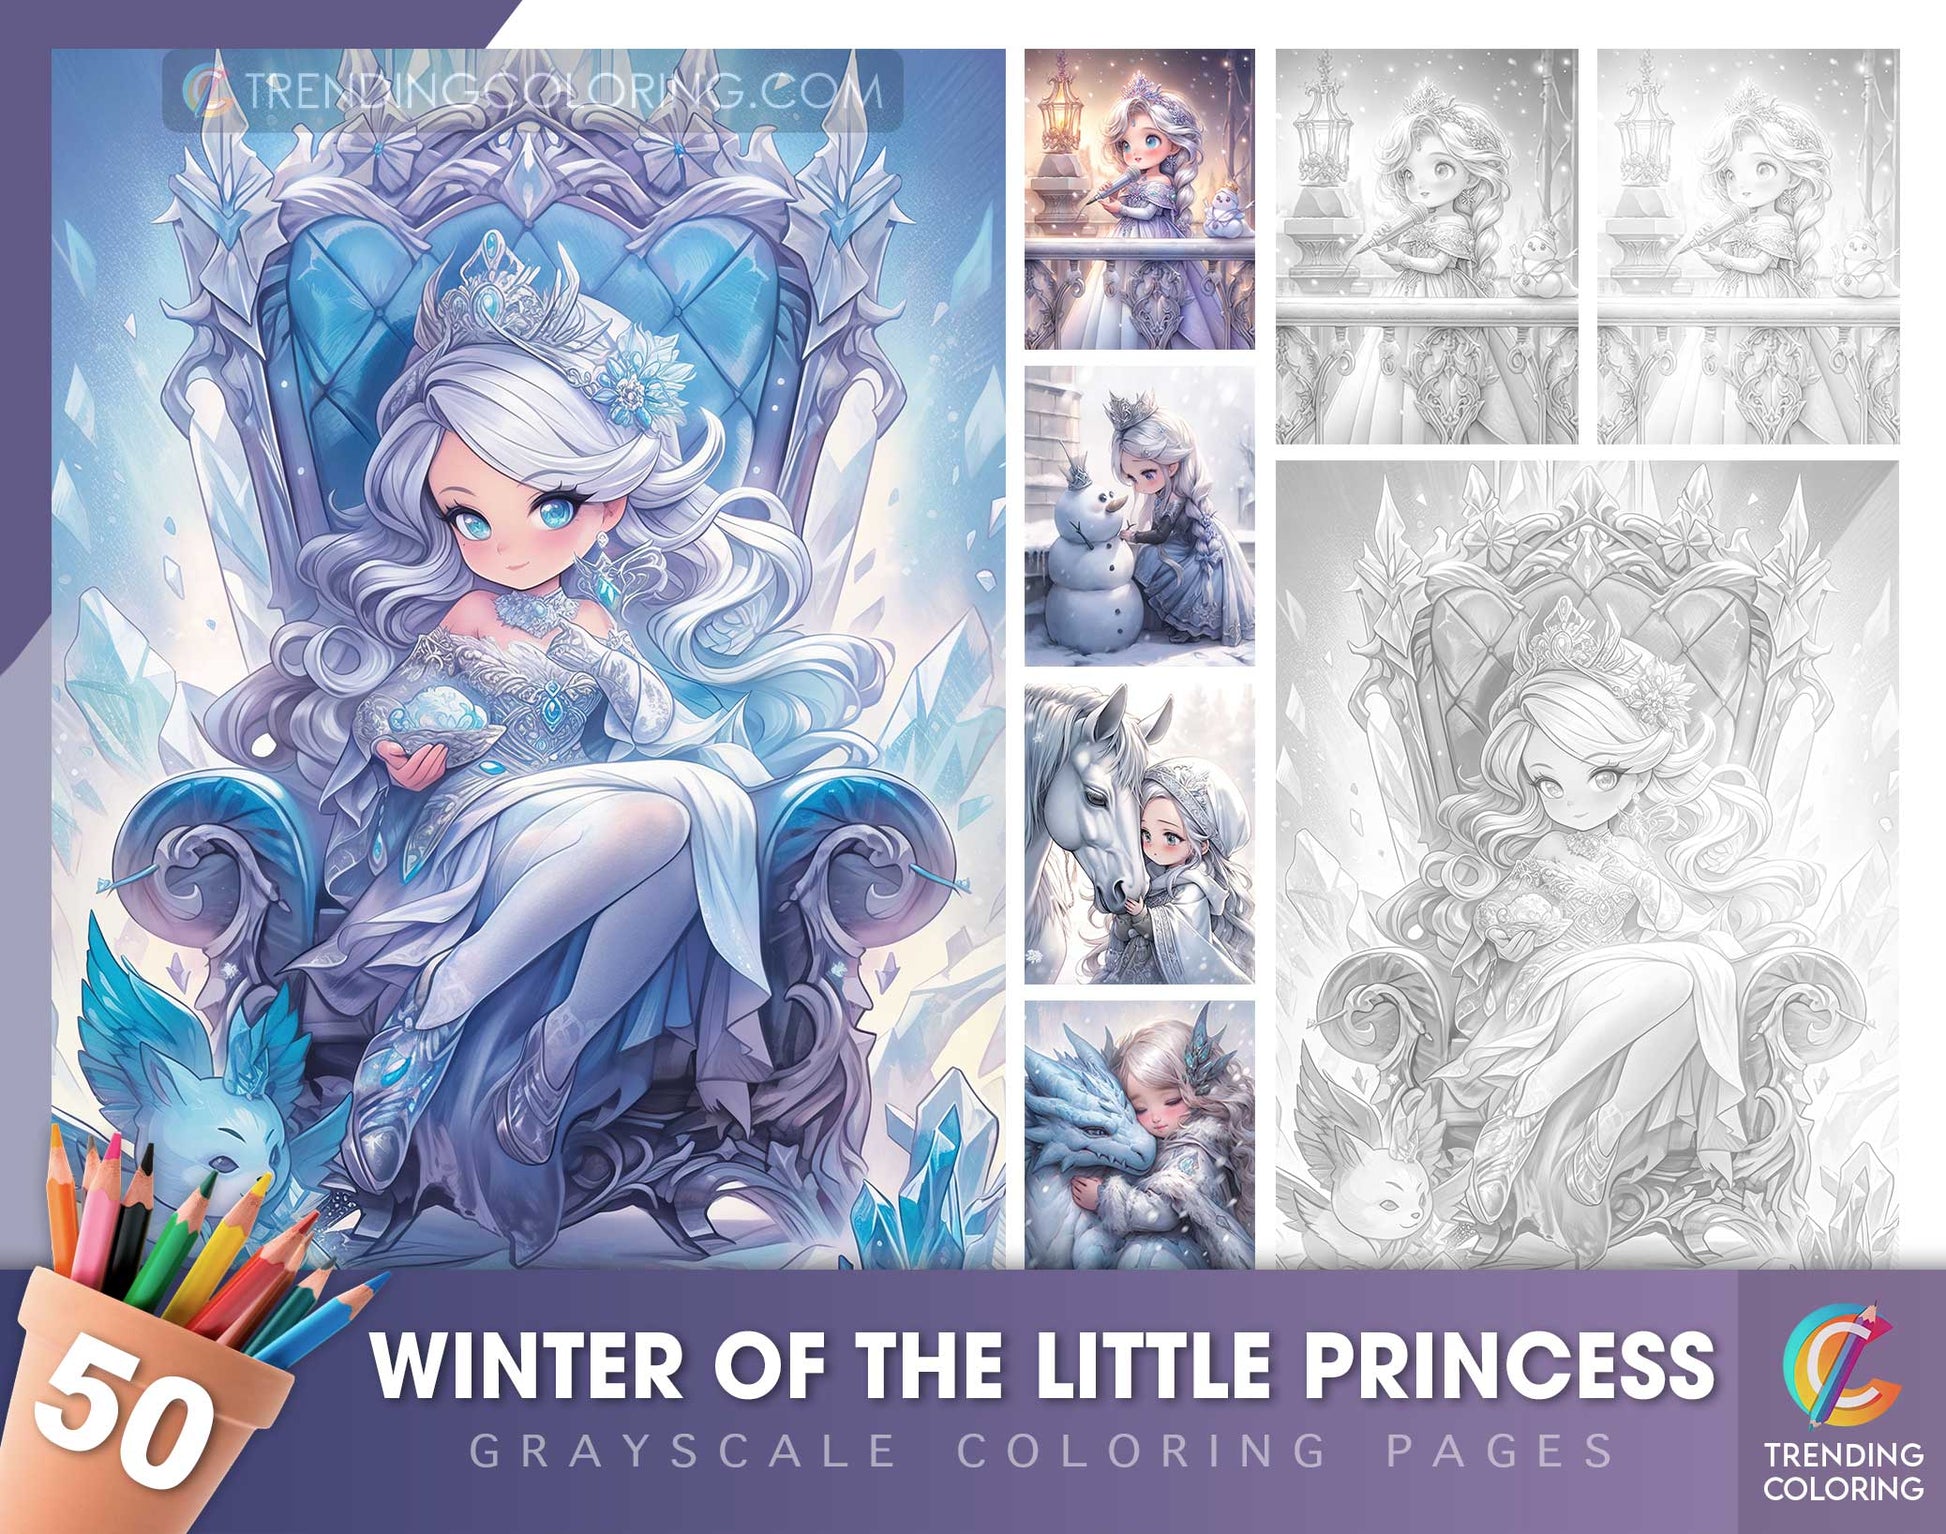 50 Winter Of The Little Princess Grayscale Coloring Pages - Instant Download - Printable Dark/Light PDF